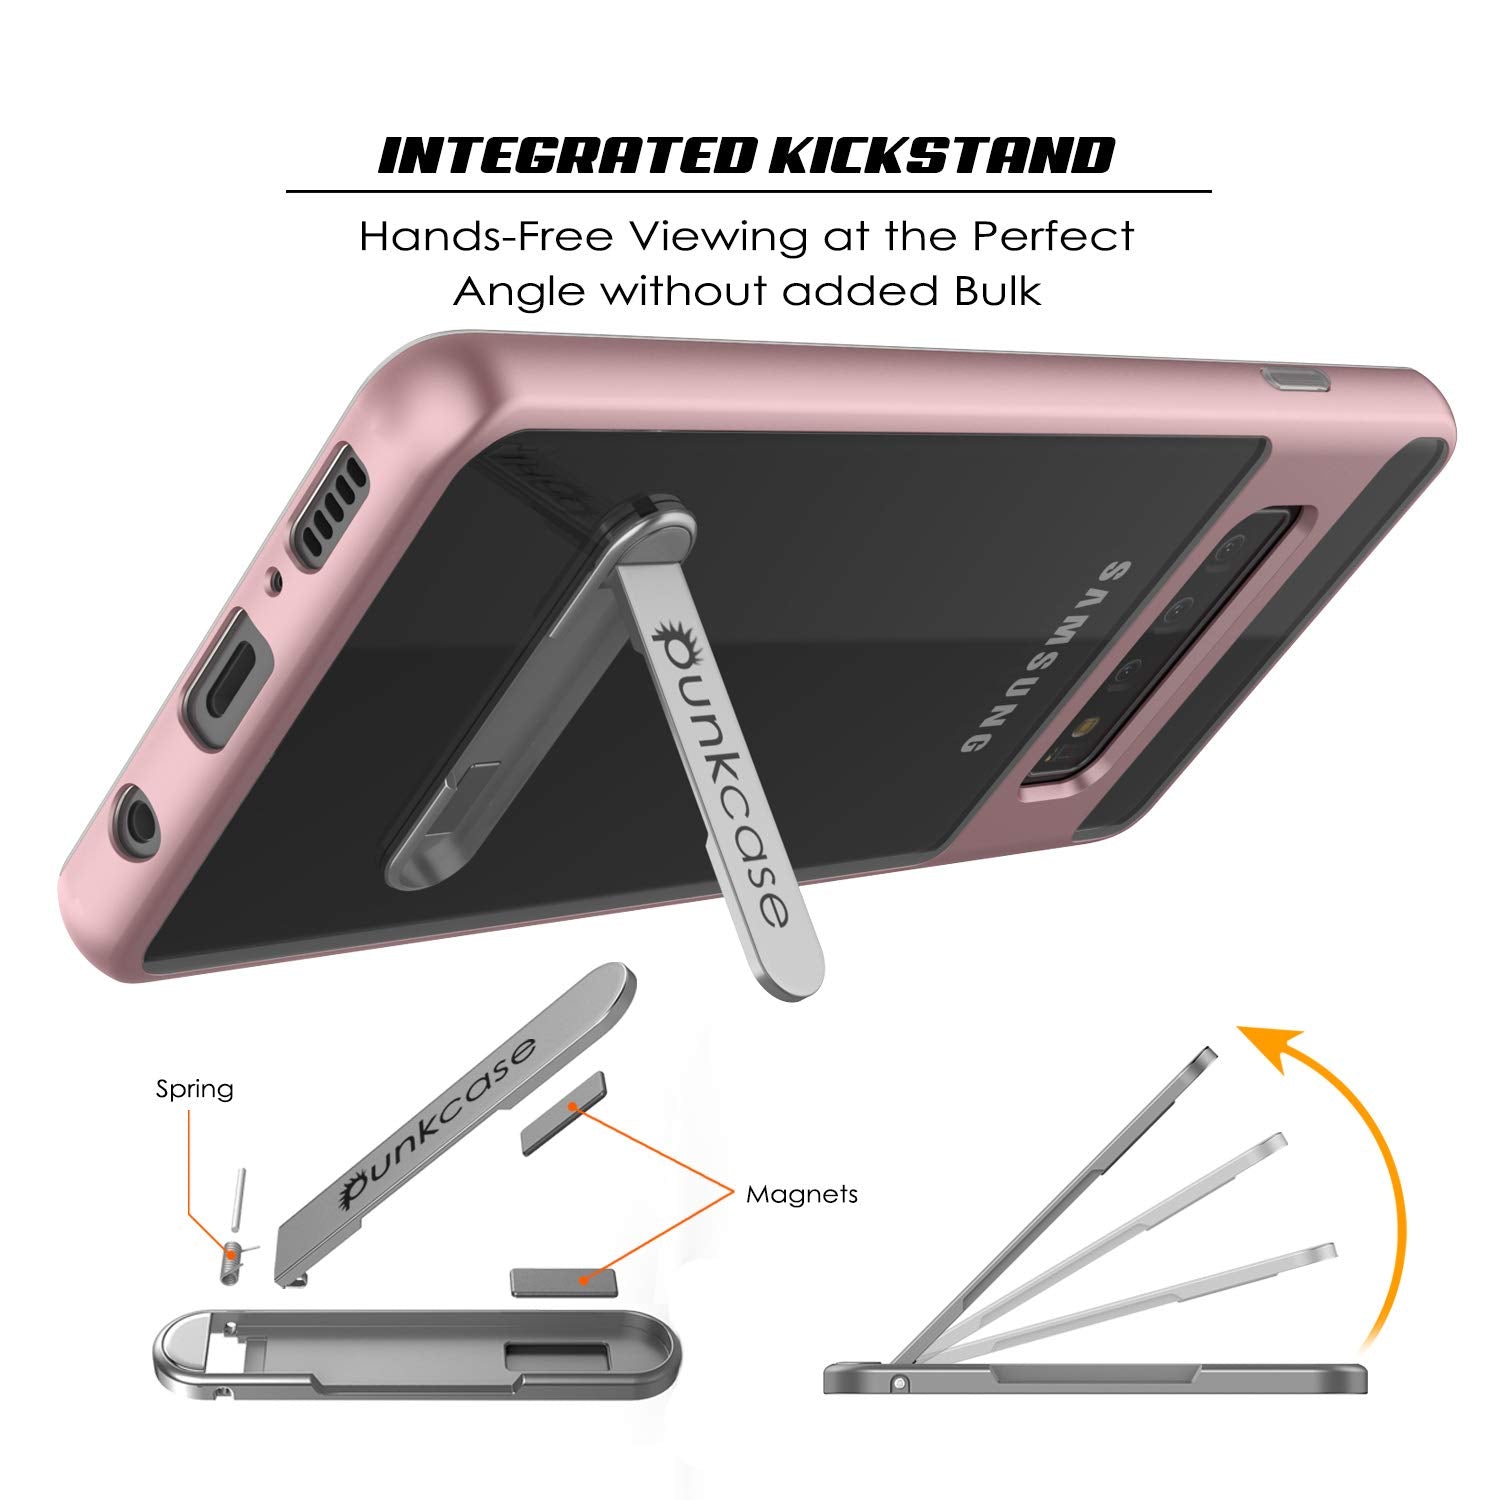 Galaxy S10 Case, PUNKcase [LUCID 3.0 Series] [Slim Fit] Armor Cover w/ Integrated Screen Protector [Rose Gold]